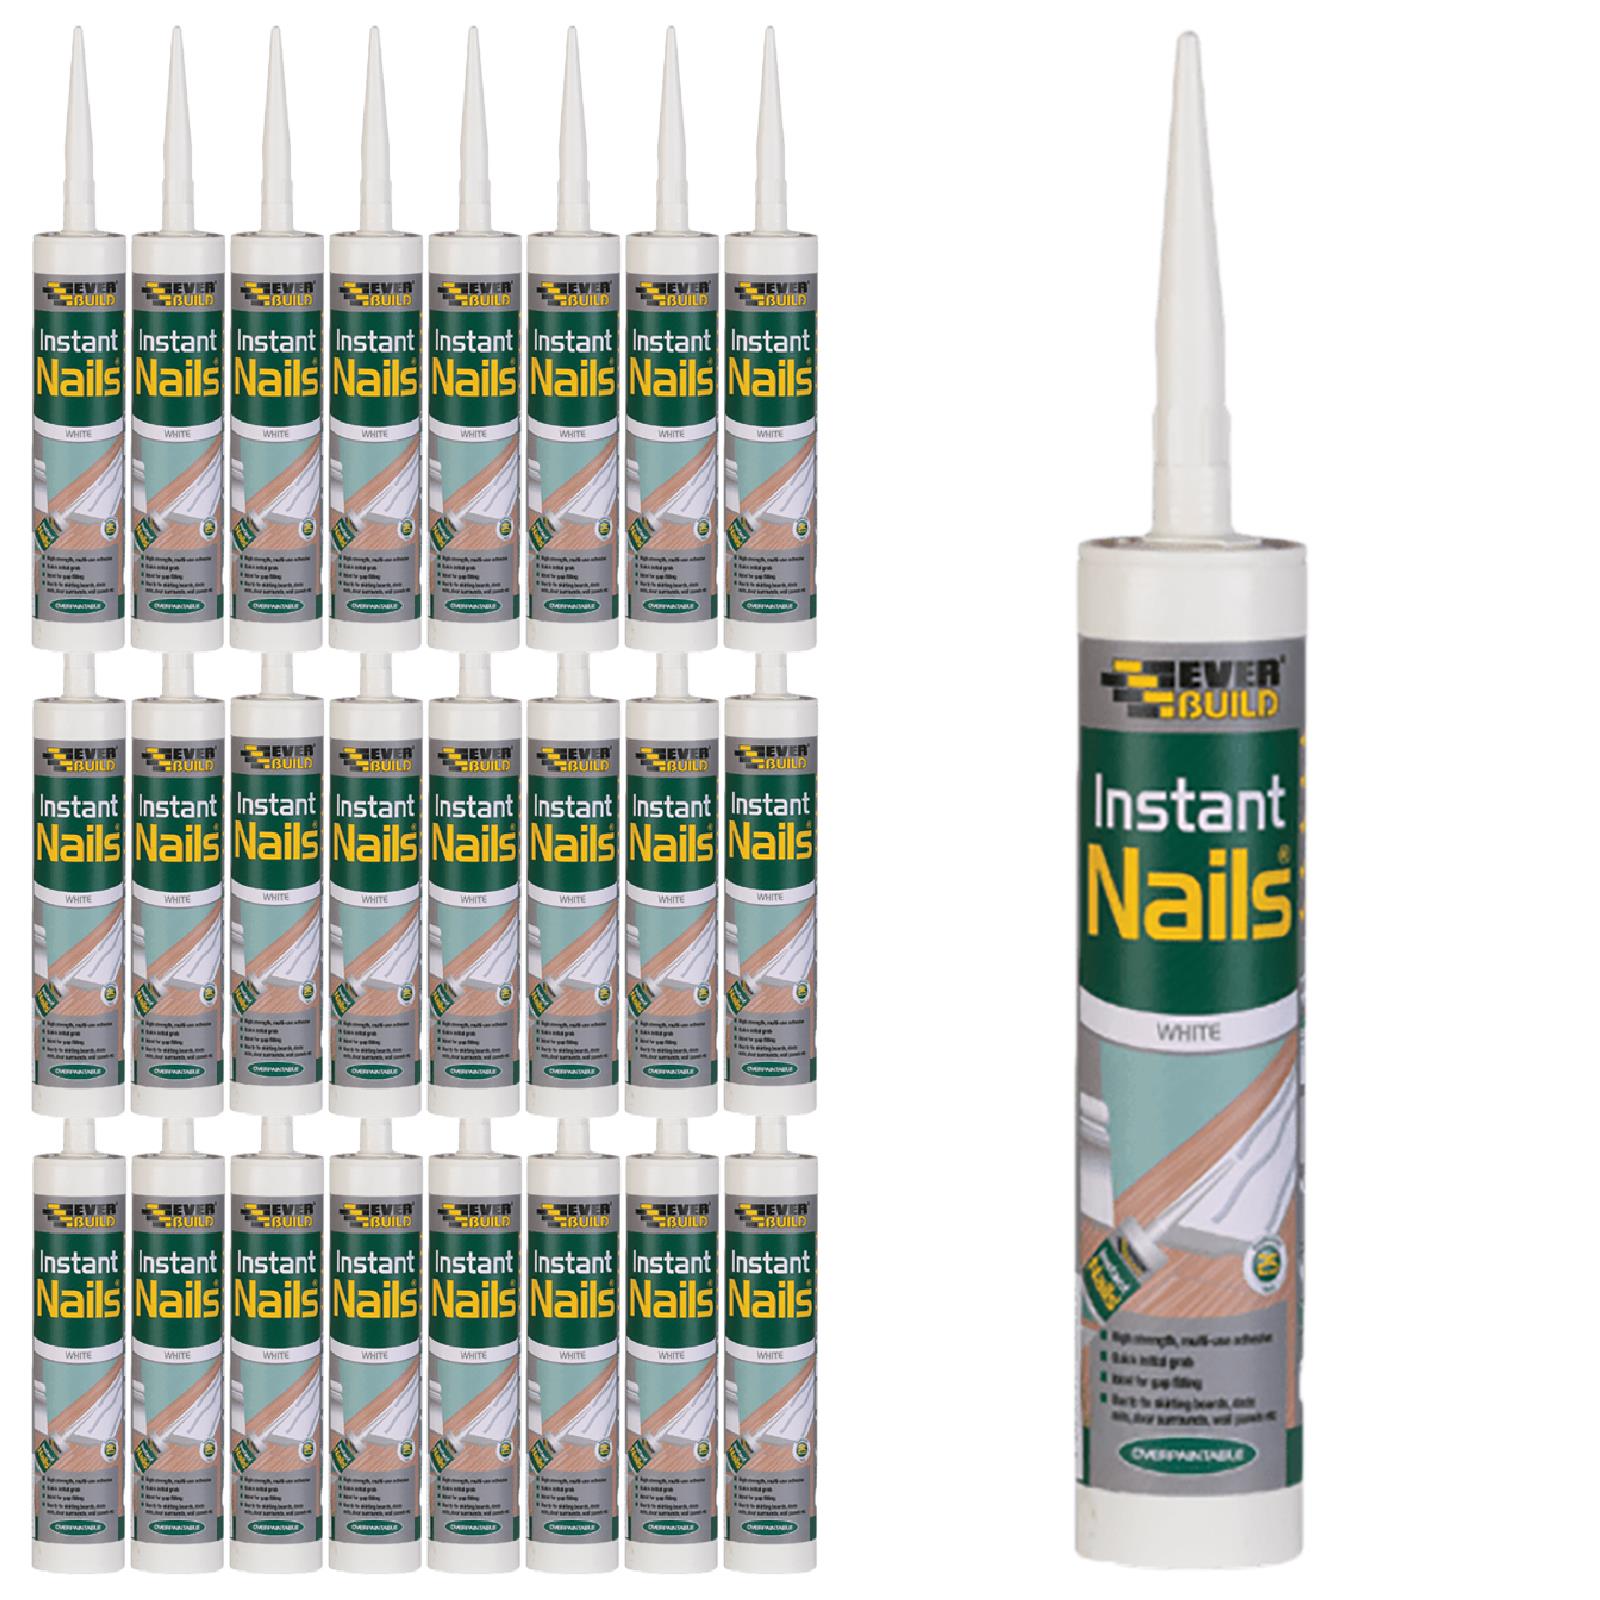 EverBuild Instant Nails White 290ml High Strength Solvent Free Gap Filling 25 Pack